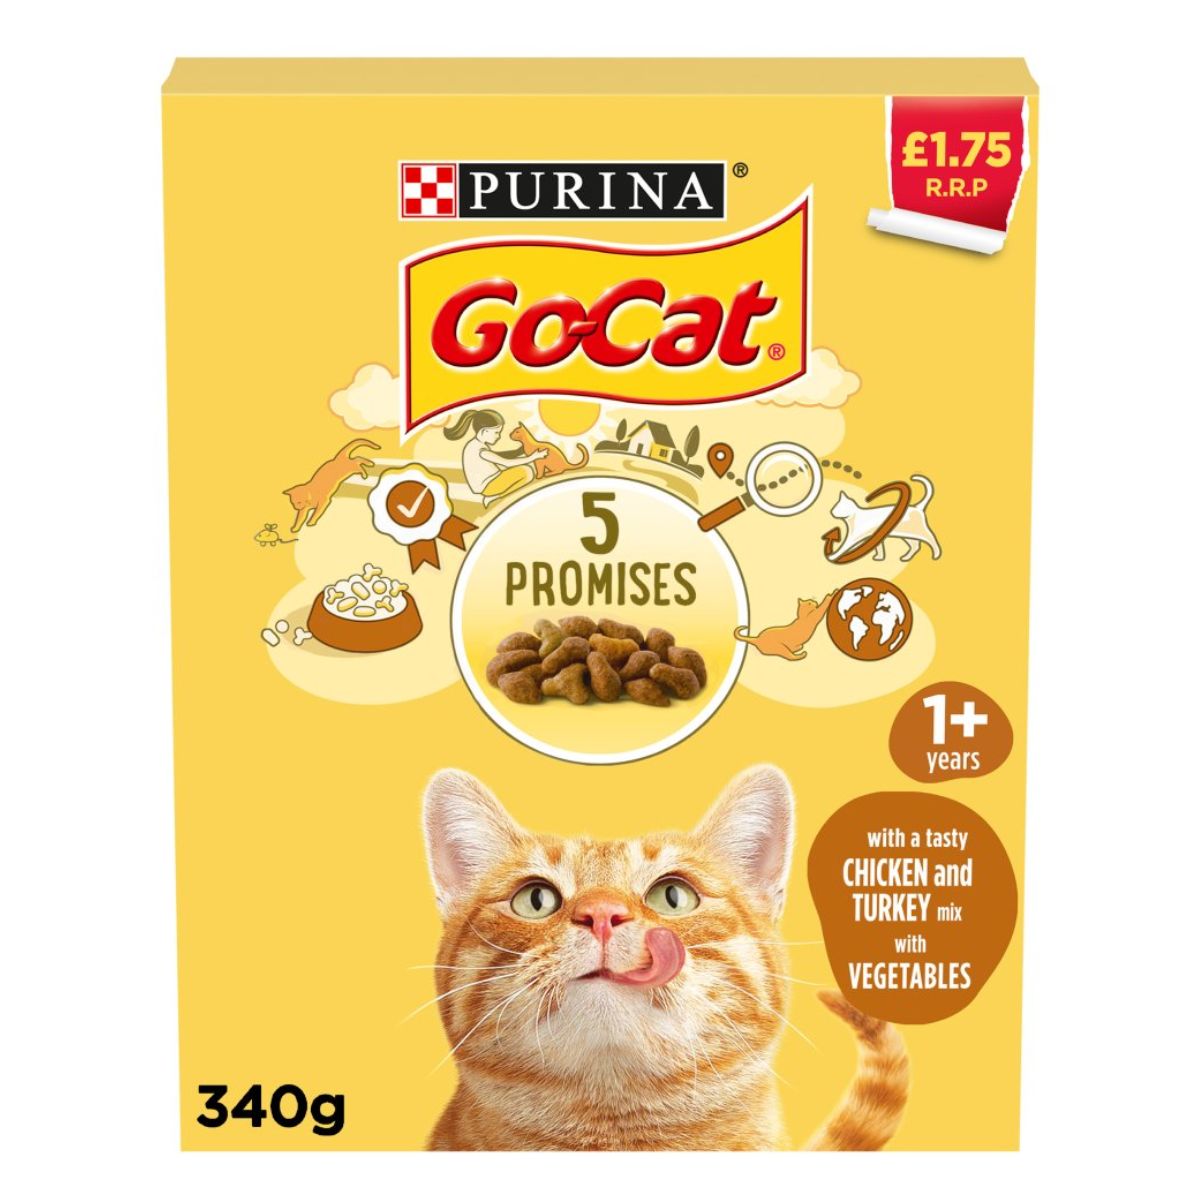 Purina - Go-Cat with a Tasty Chicken and Turkey Mix with Vegetables 1+ Years - 340g 5 promises cat food.